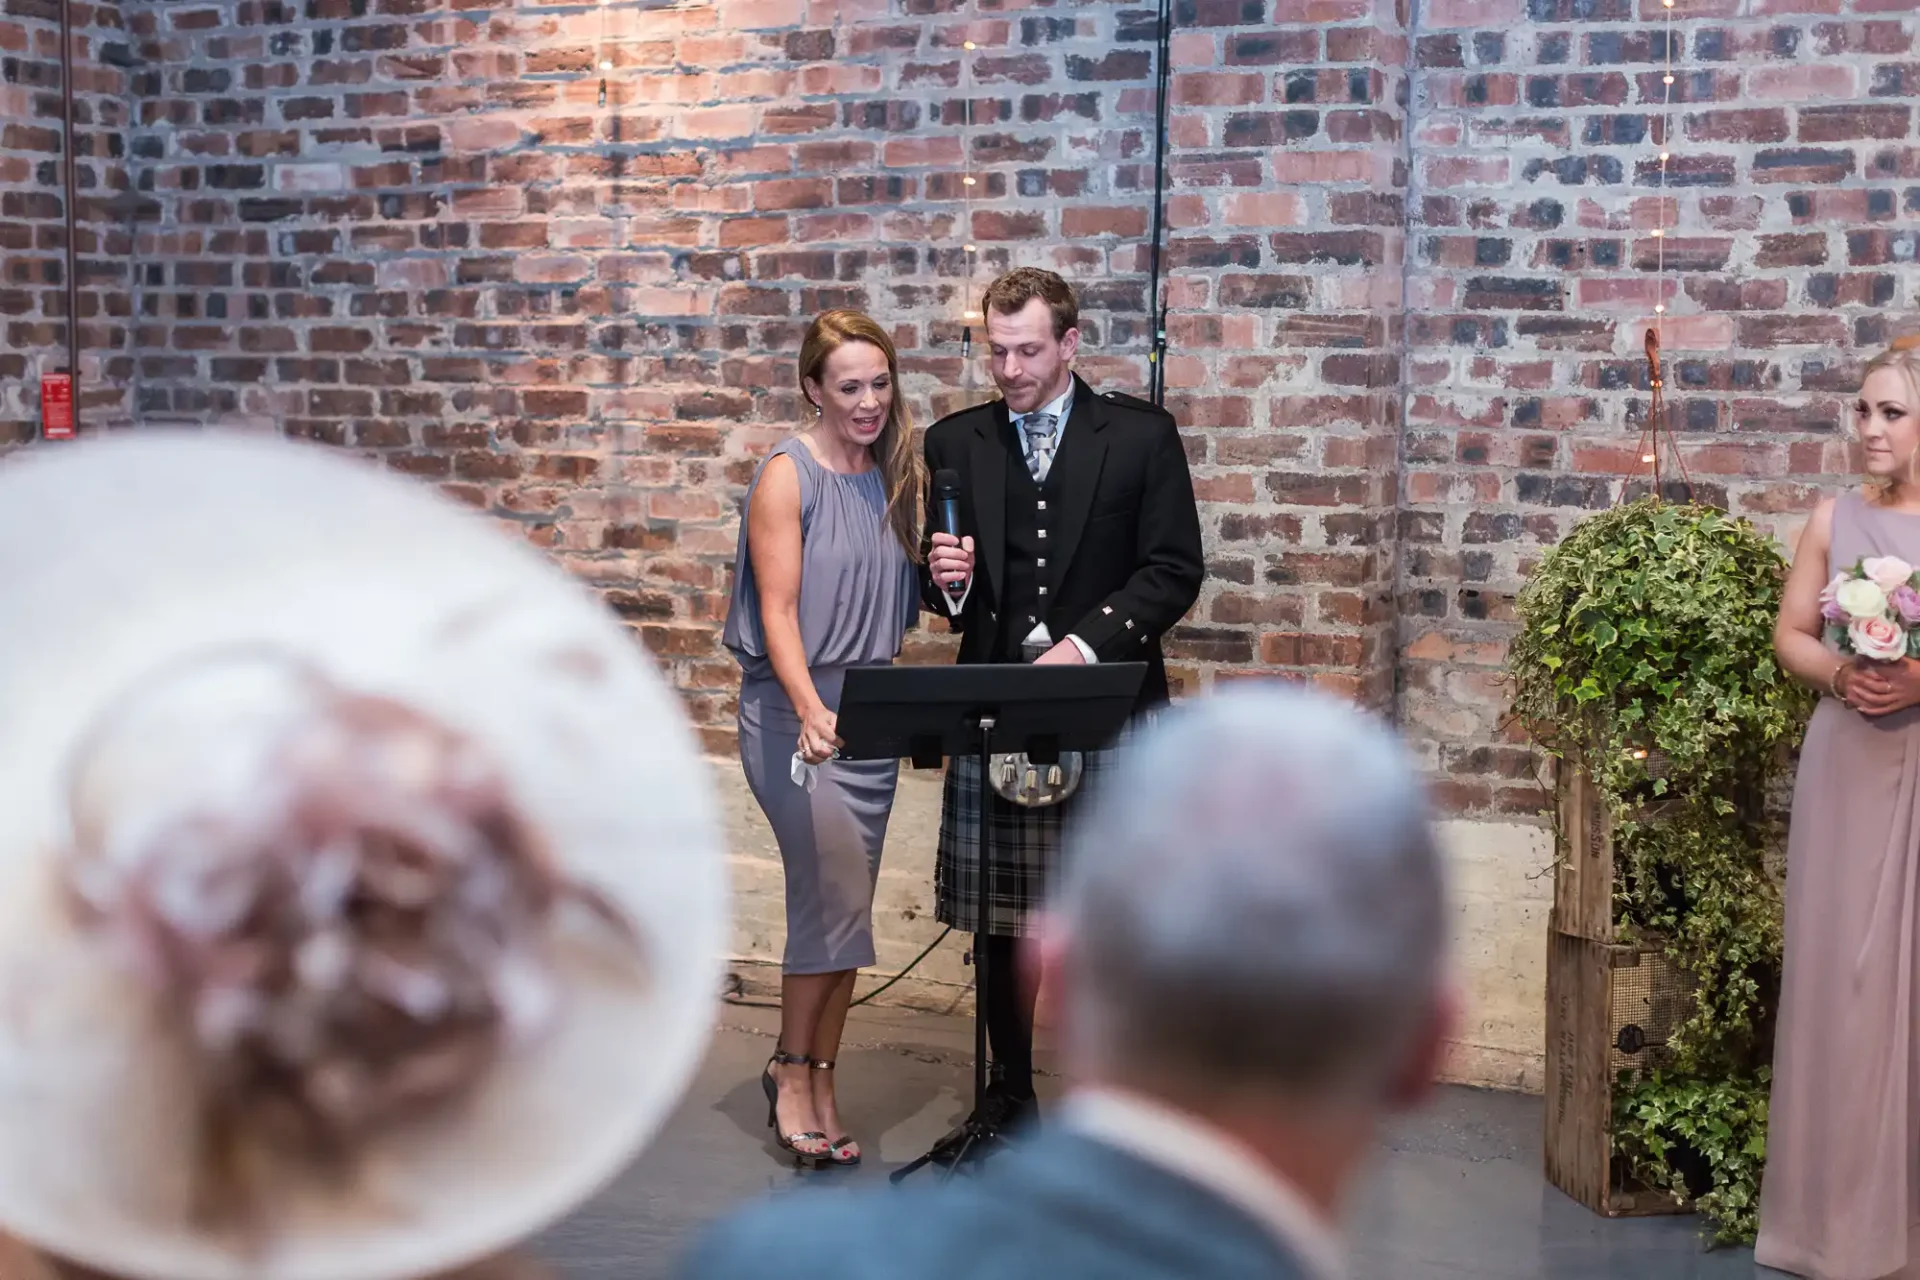 A man in a kilt and a woman holding a microphone deliver a speech at a wedding, with guests listening in a venue with brick walls.